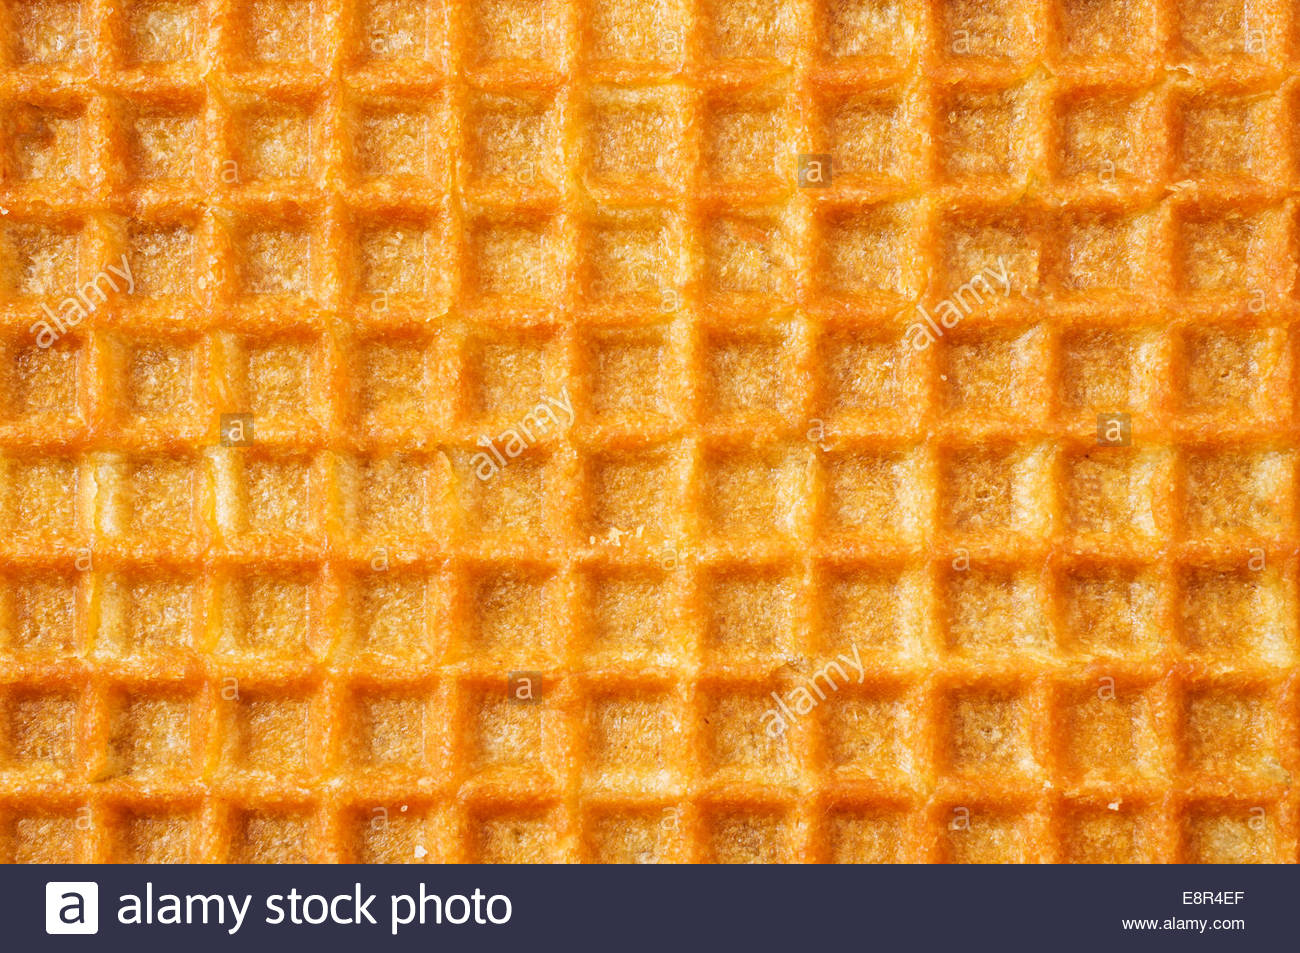 Waffles Background Cell Texture Closeup Stock Photo